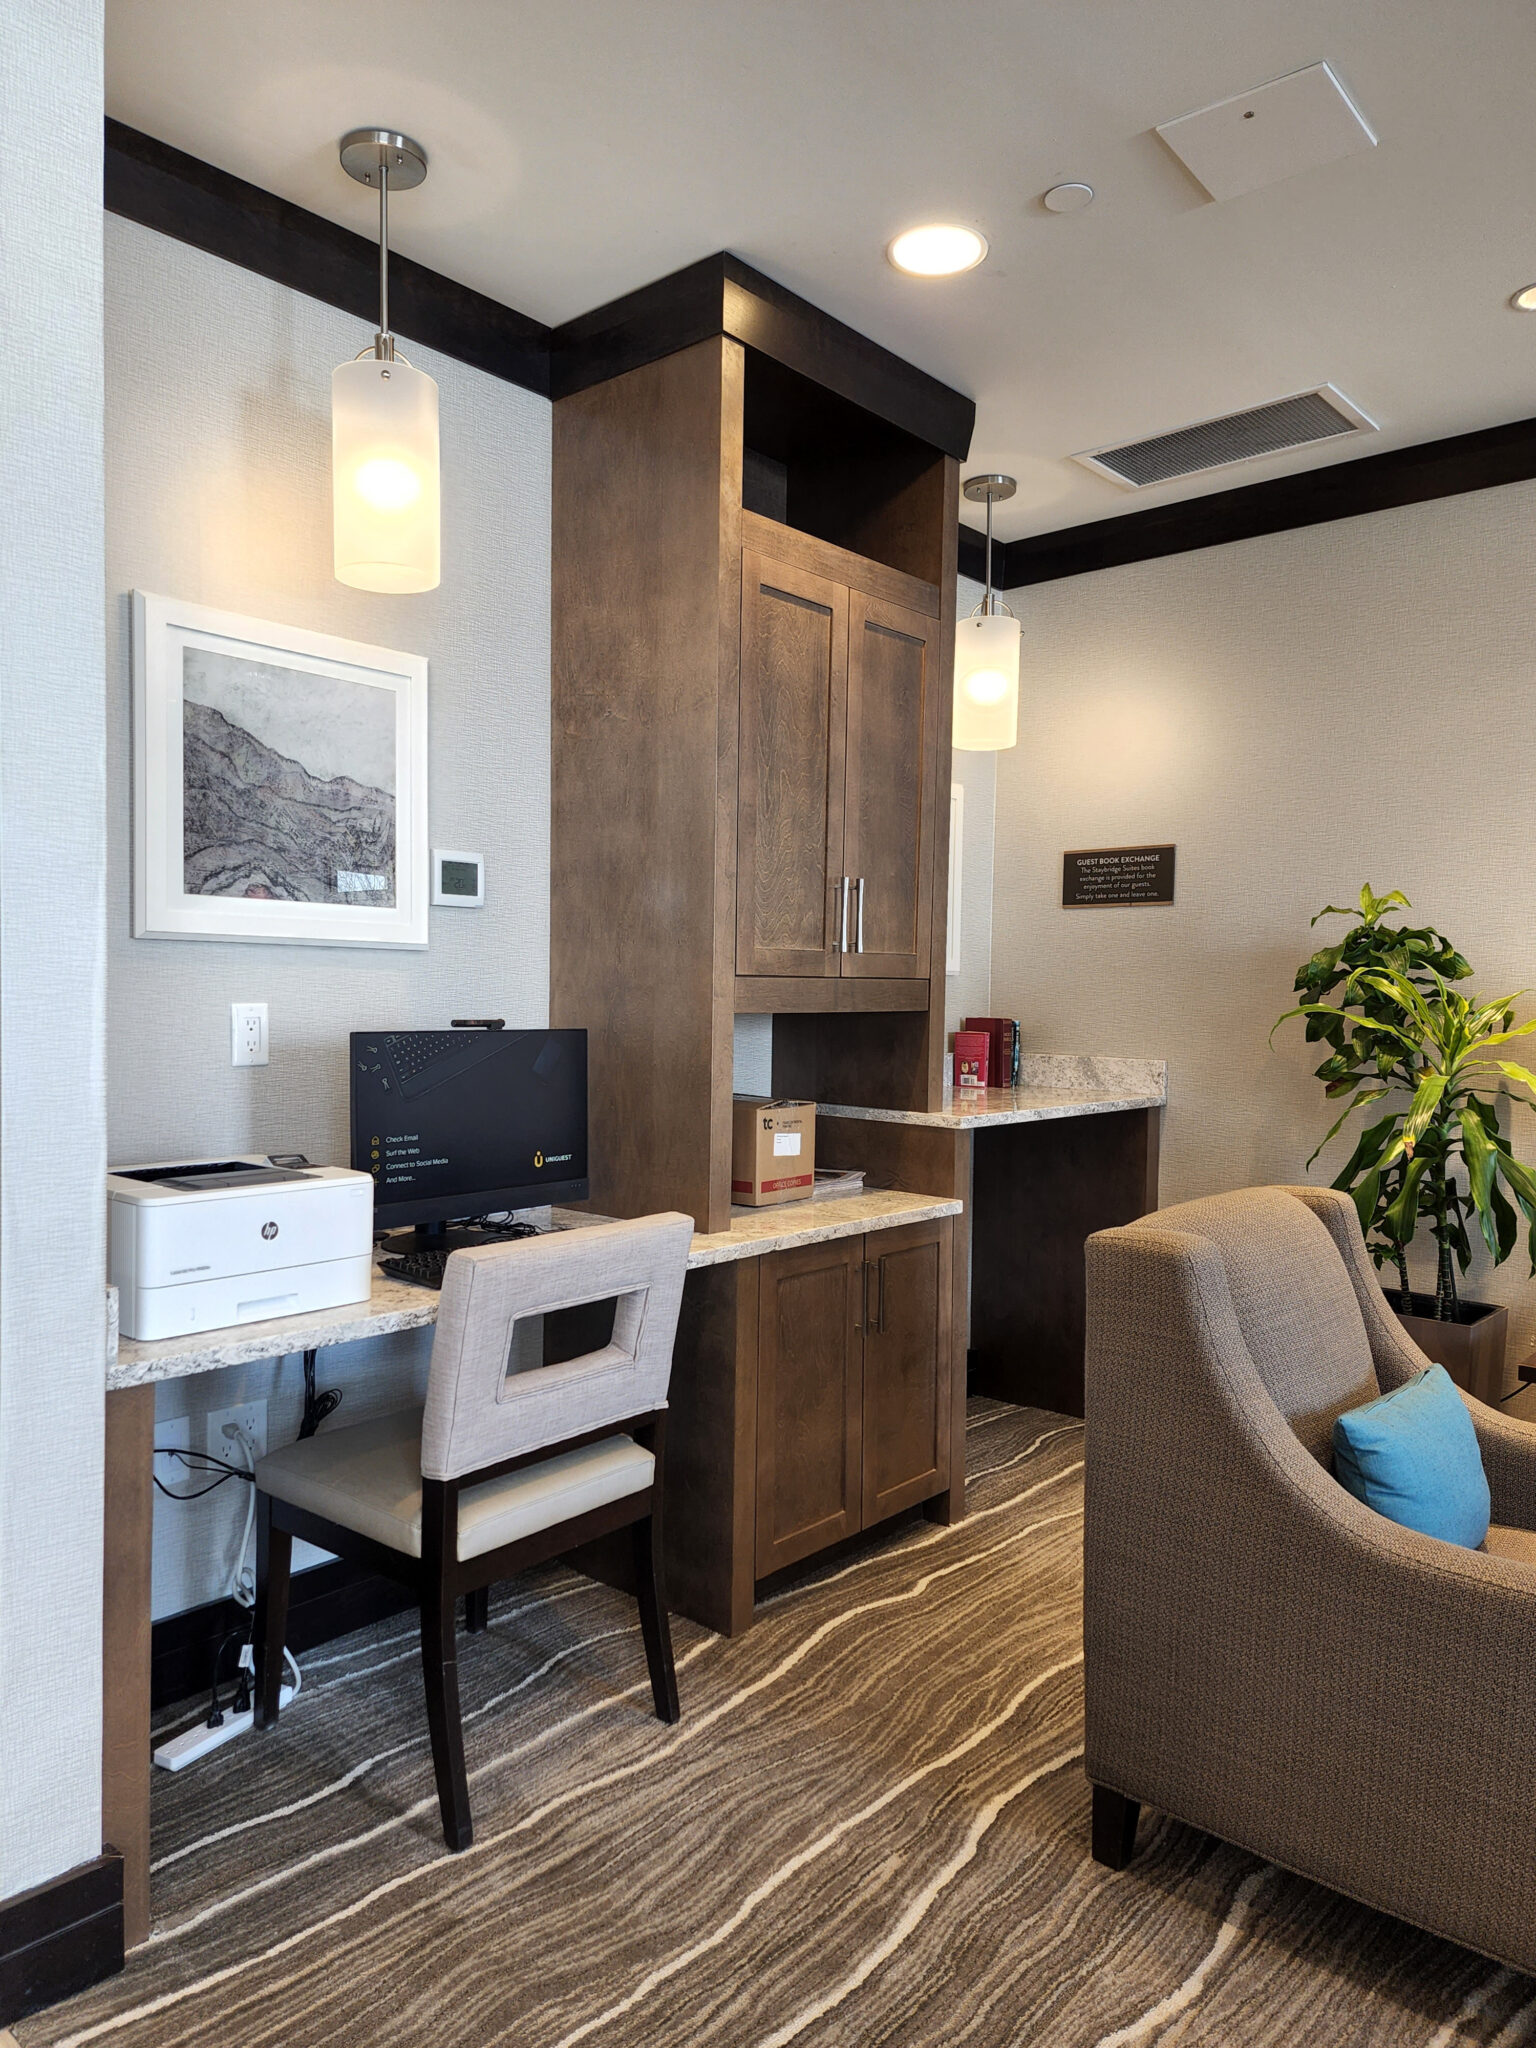 The Business Suite at the Staybridge Suites in Waterloo-St. Jacobs.